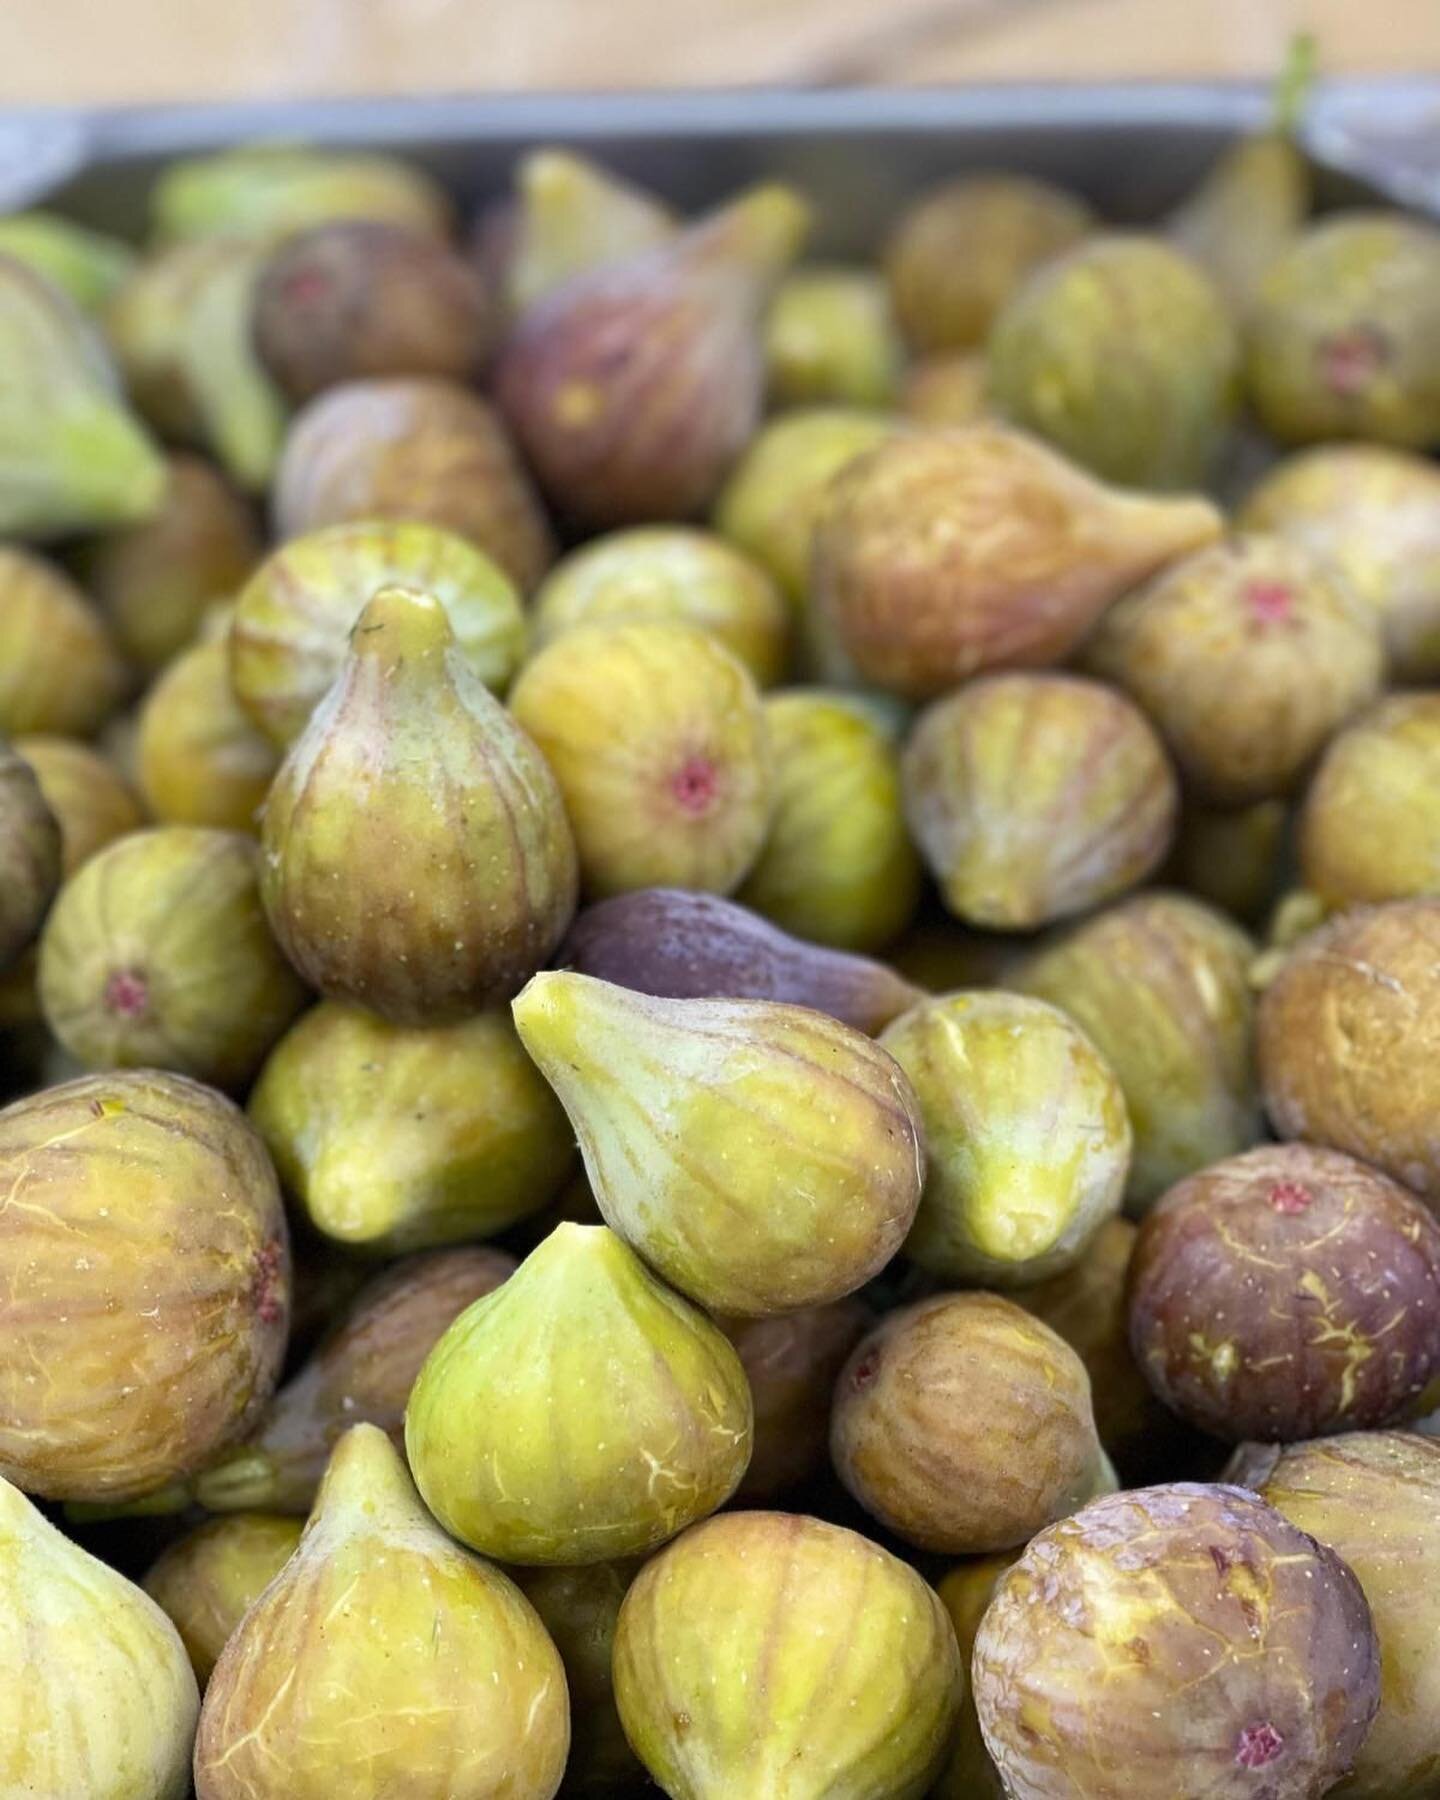 It&rsquo;s that time of the year! Fresh figs (تين) now in stock - harvested this morning! 

Stop by today before they&rsquo;re all out. Provided by Almadina Farms.